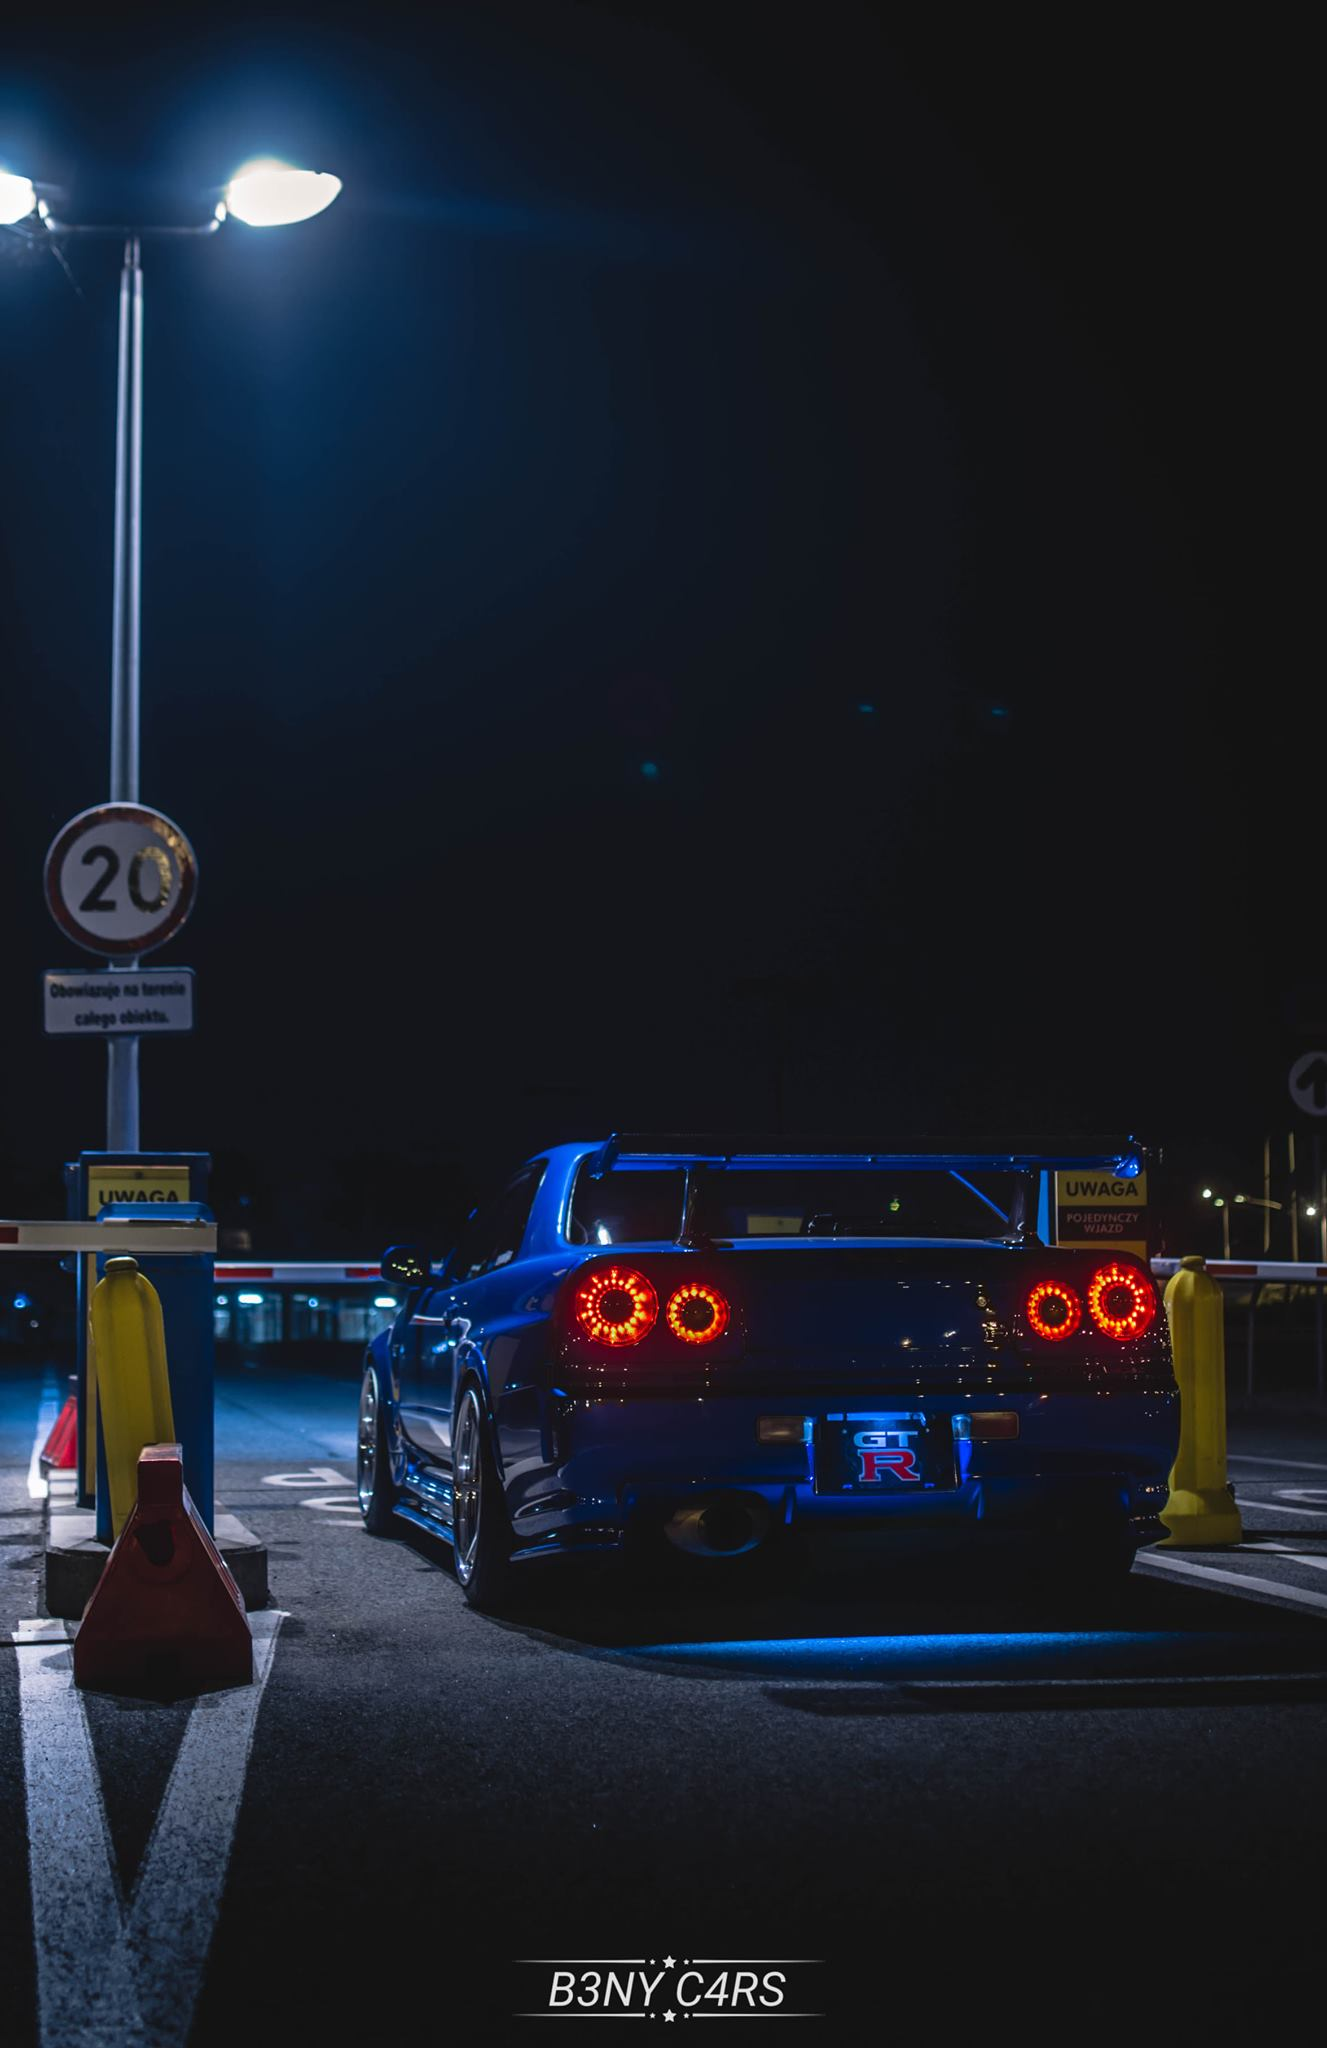 Nissan Skyline R34 Iphone Wallpaper 18 Wallpapers Book Your 1 Source For Free Download Hd 4k High Quality Wallpapers